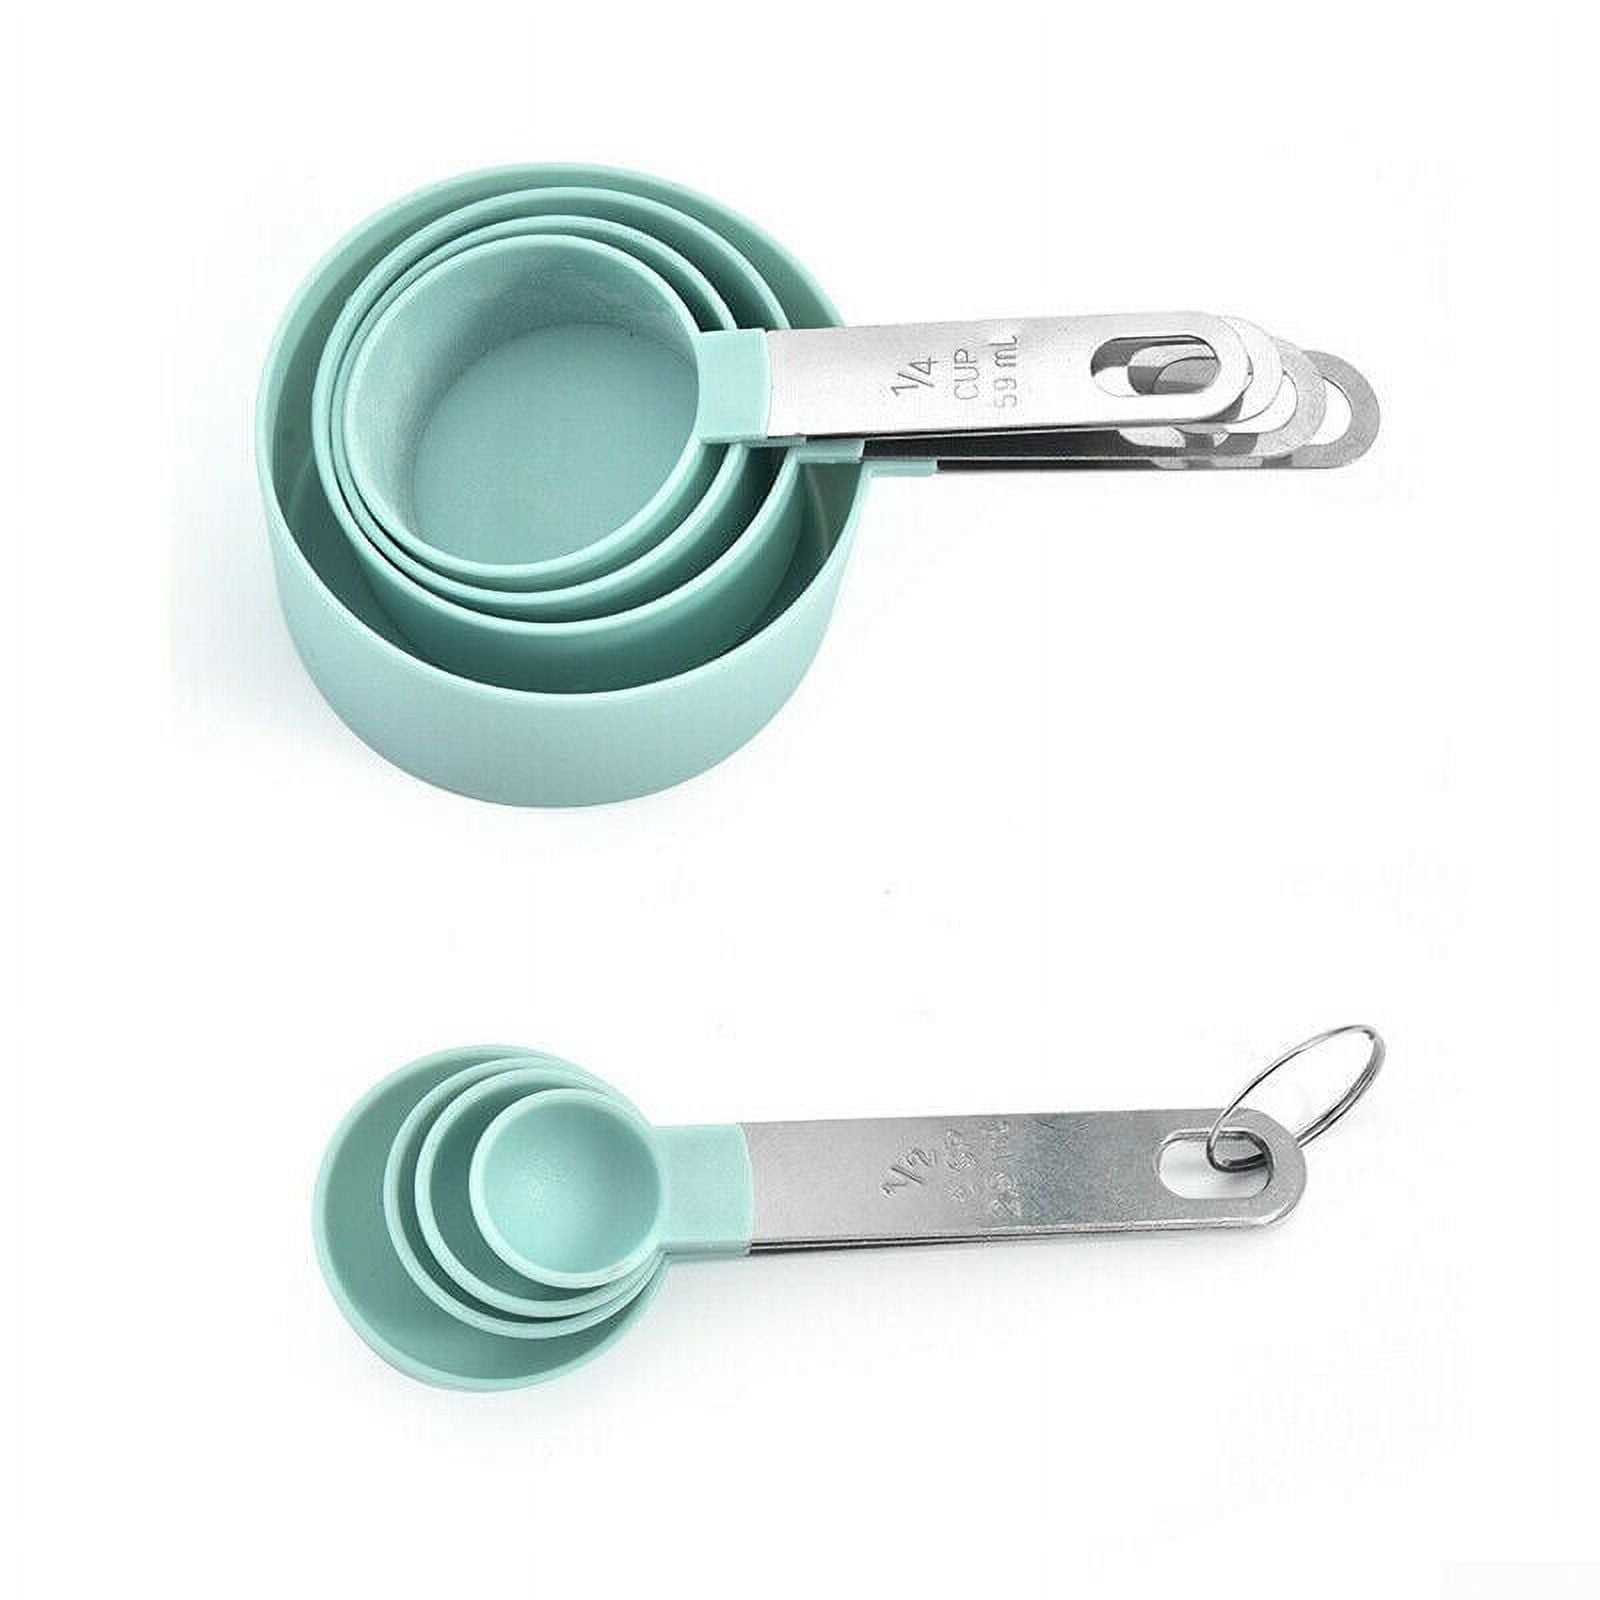 Hastings Home Stainless Steel Measuring Cups And Spoons For Baking